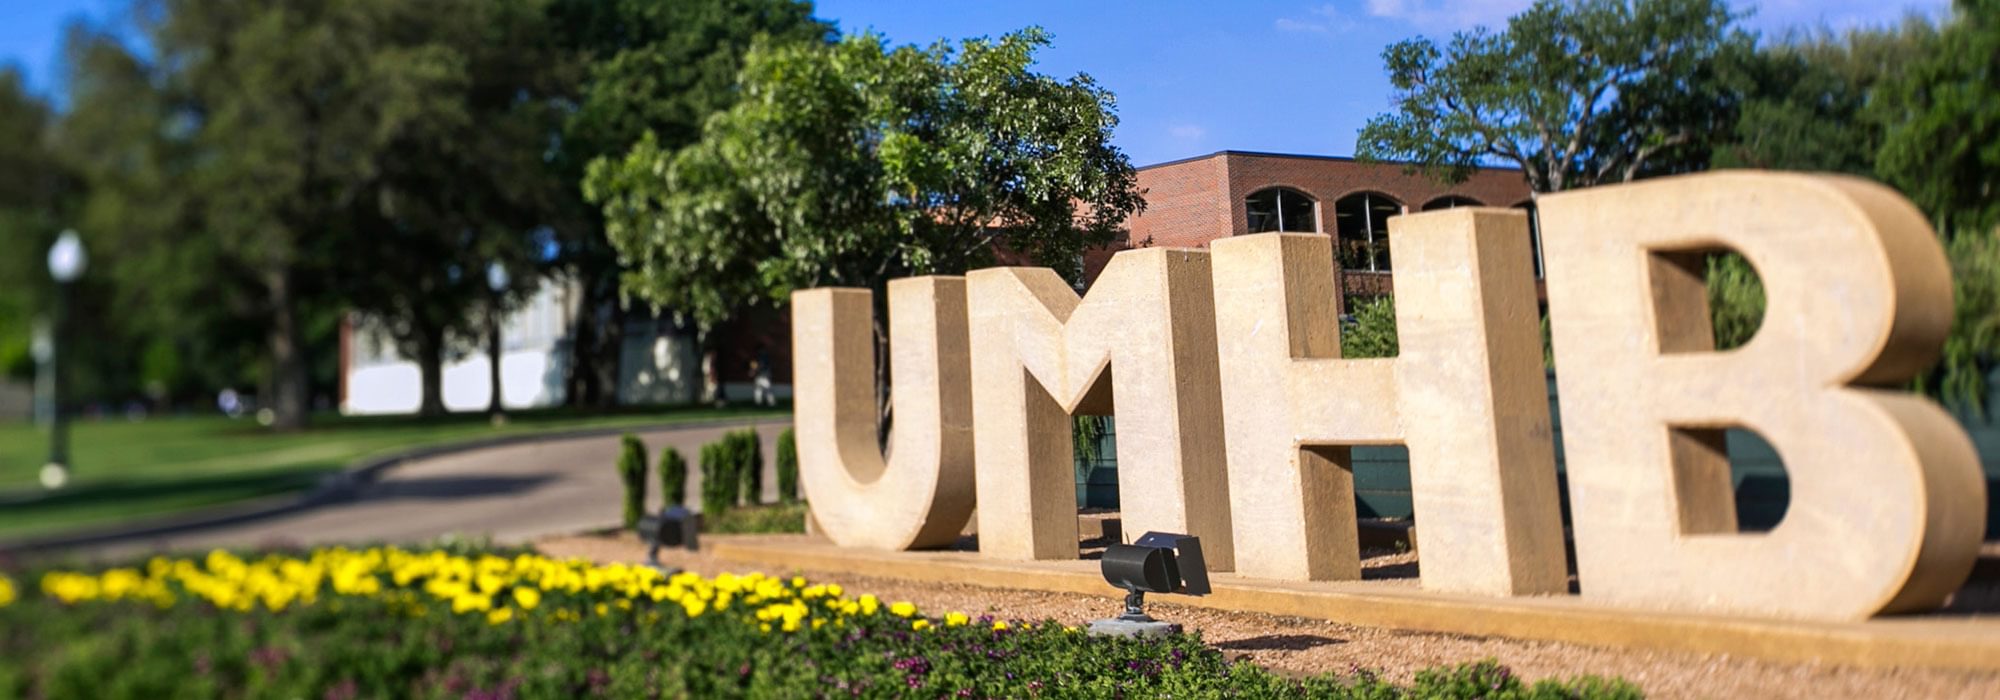 UMHB Hosts Fort Worth Symphony Orchestra at Performing Arts Center